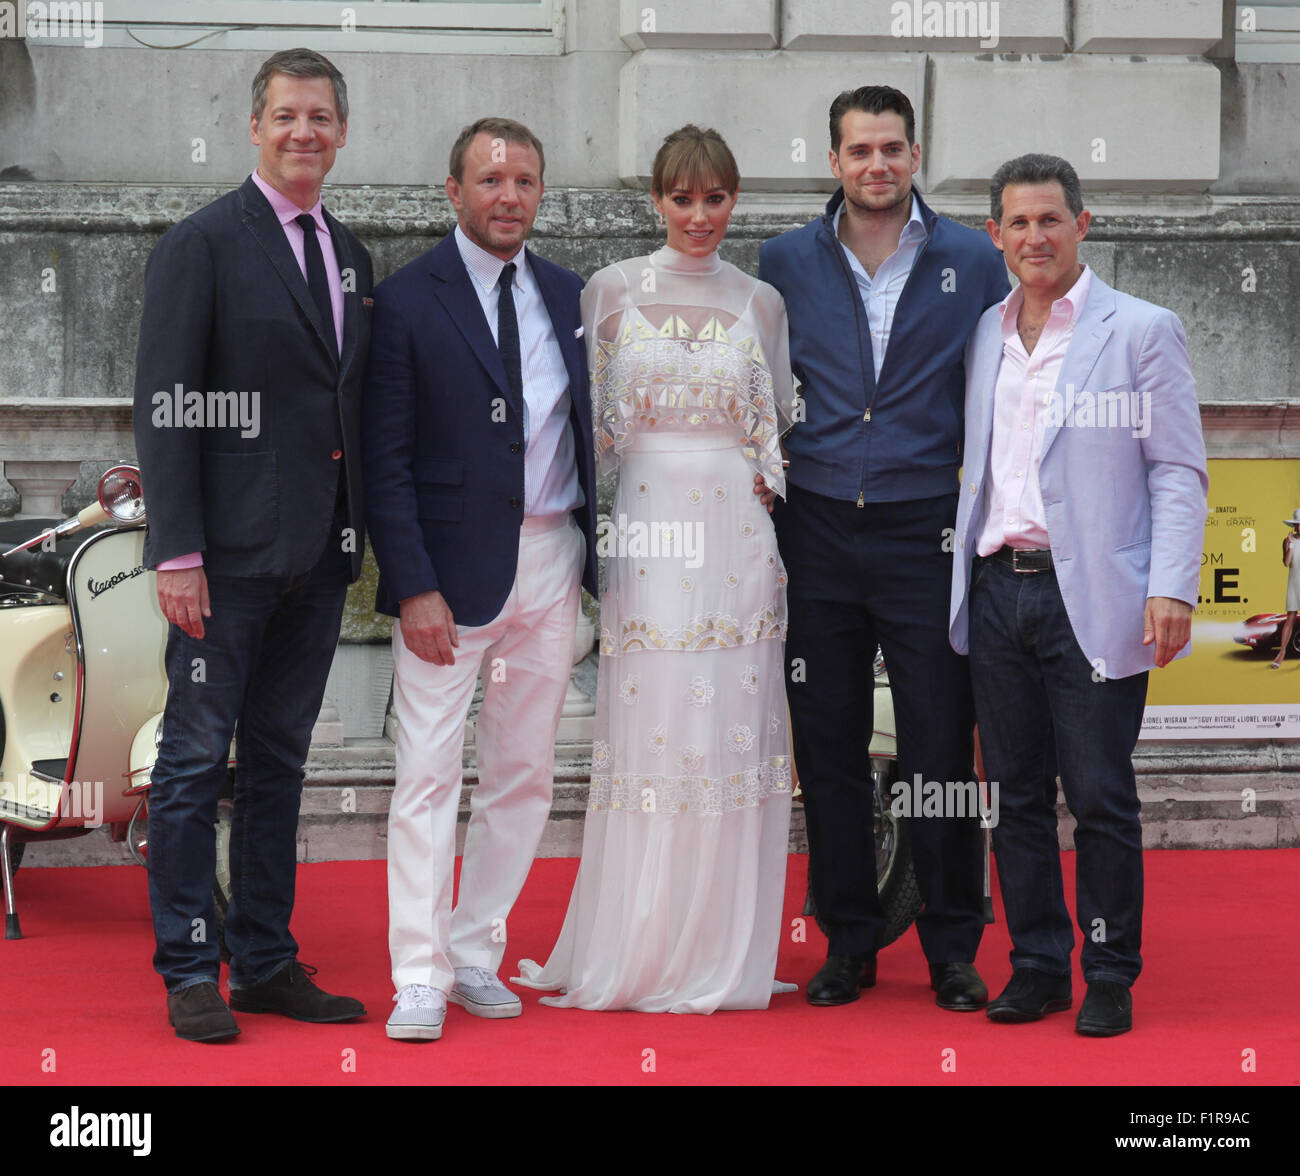 London, UK, 7th Aug 2015: (L-R) Lionel Wigram, Guy Ritchie, Jacqui Ainsley, Henry Cavill and Josh Berger attend The Man from U.N Stock Photo